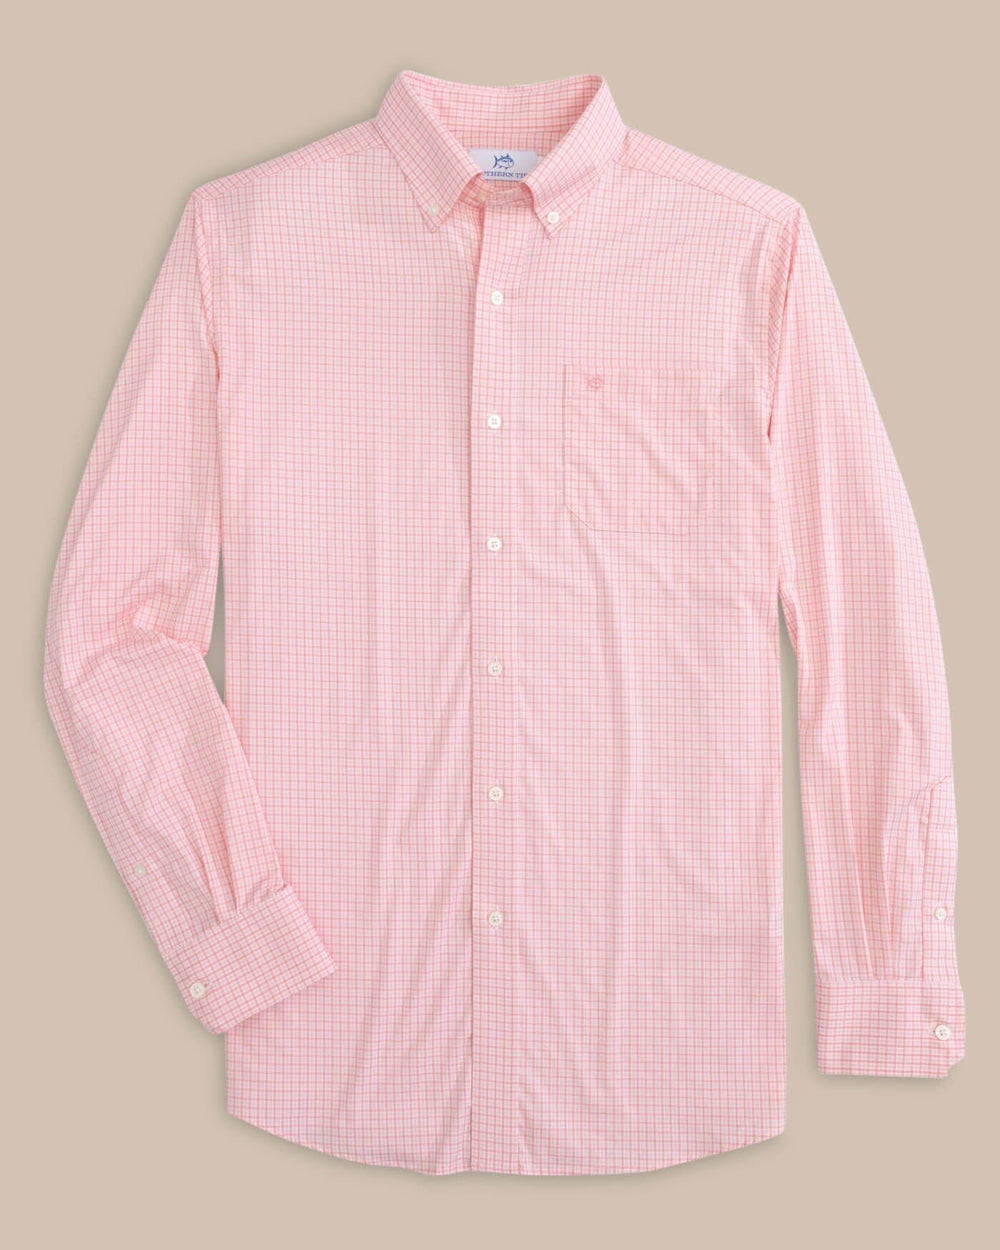 The front view of the Southern Tide brrr Intercoastal McBee Check Long Sleeve Sportshirt by Southern Tide - Geranium Pink